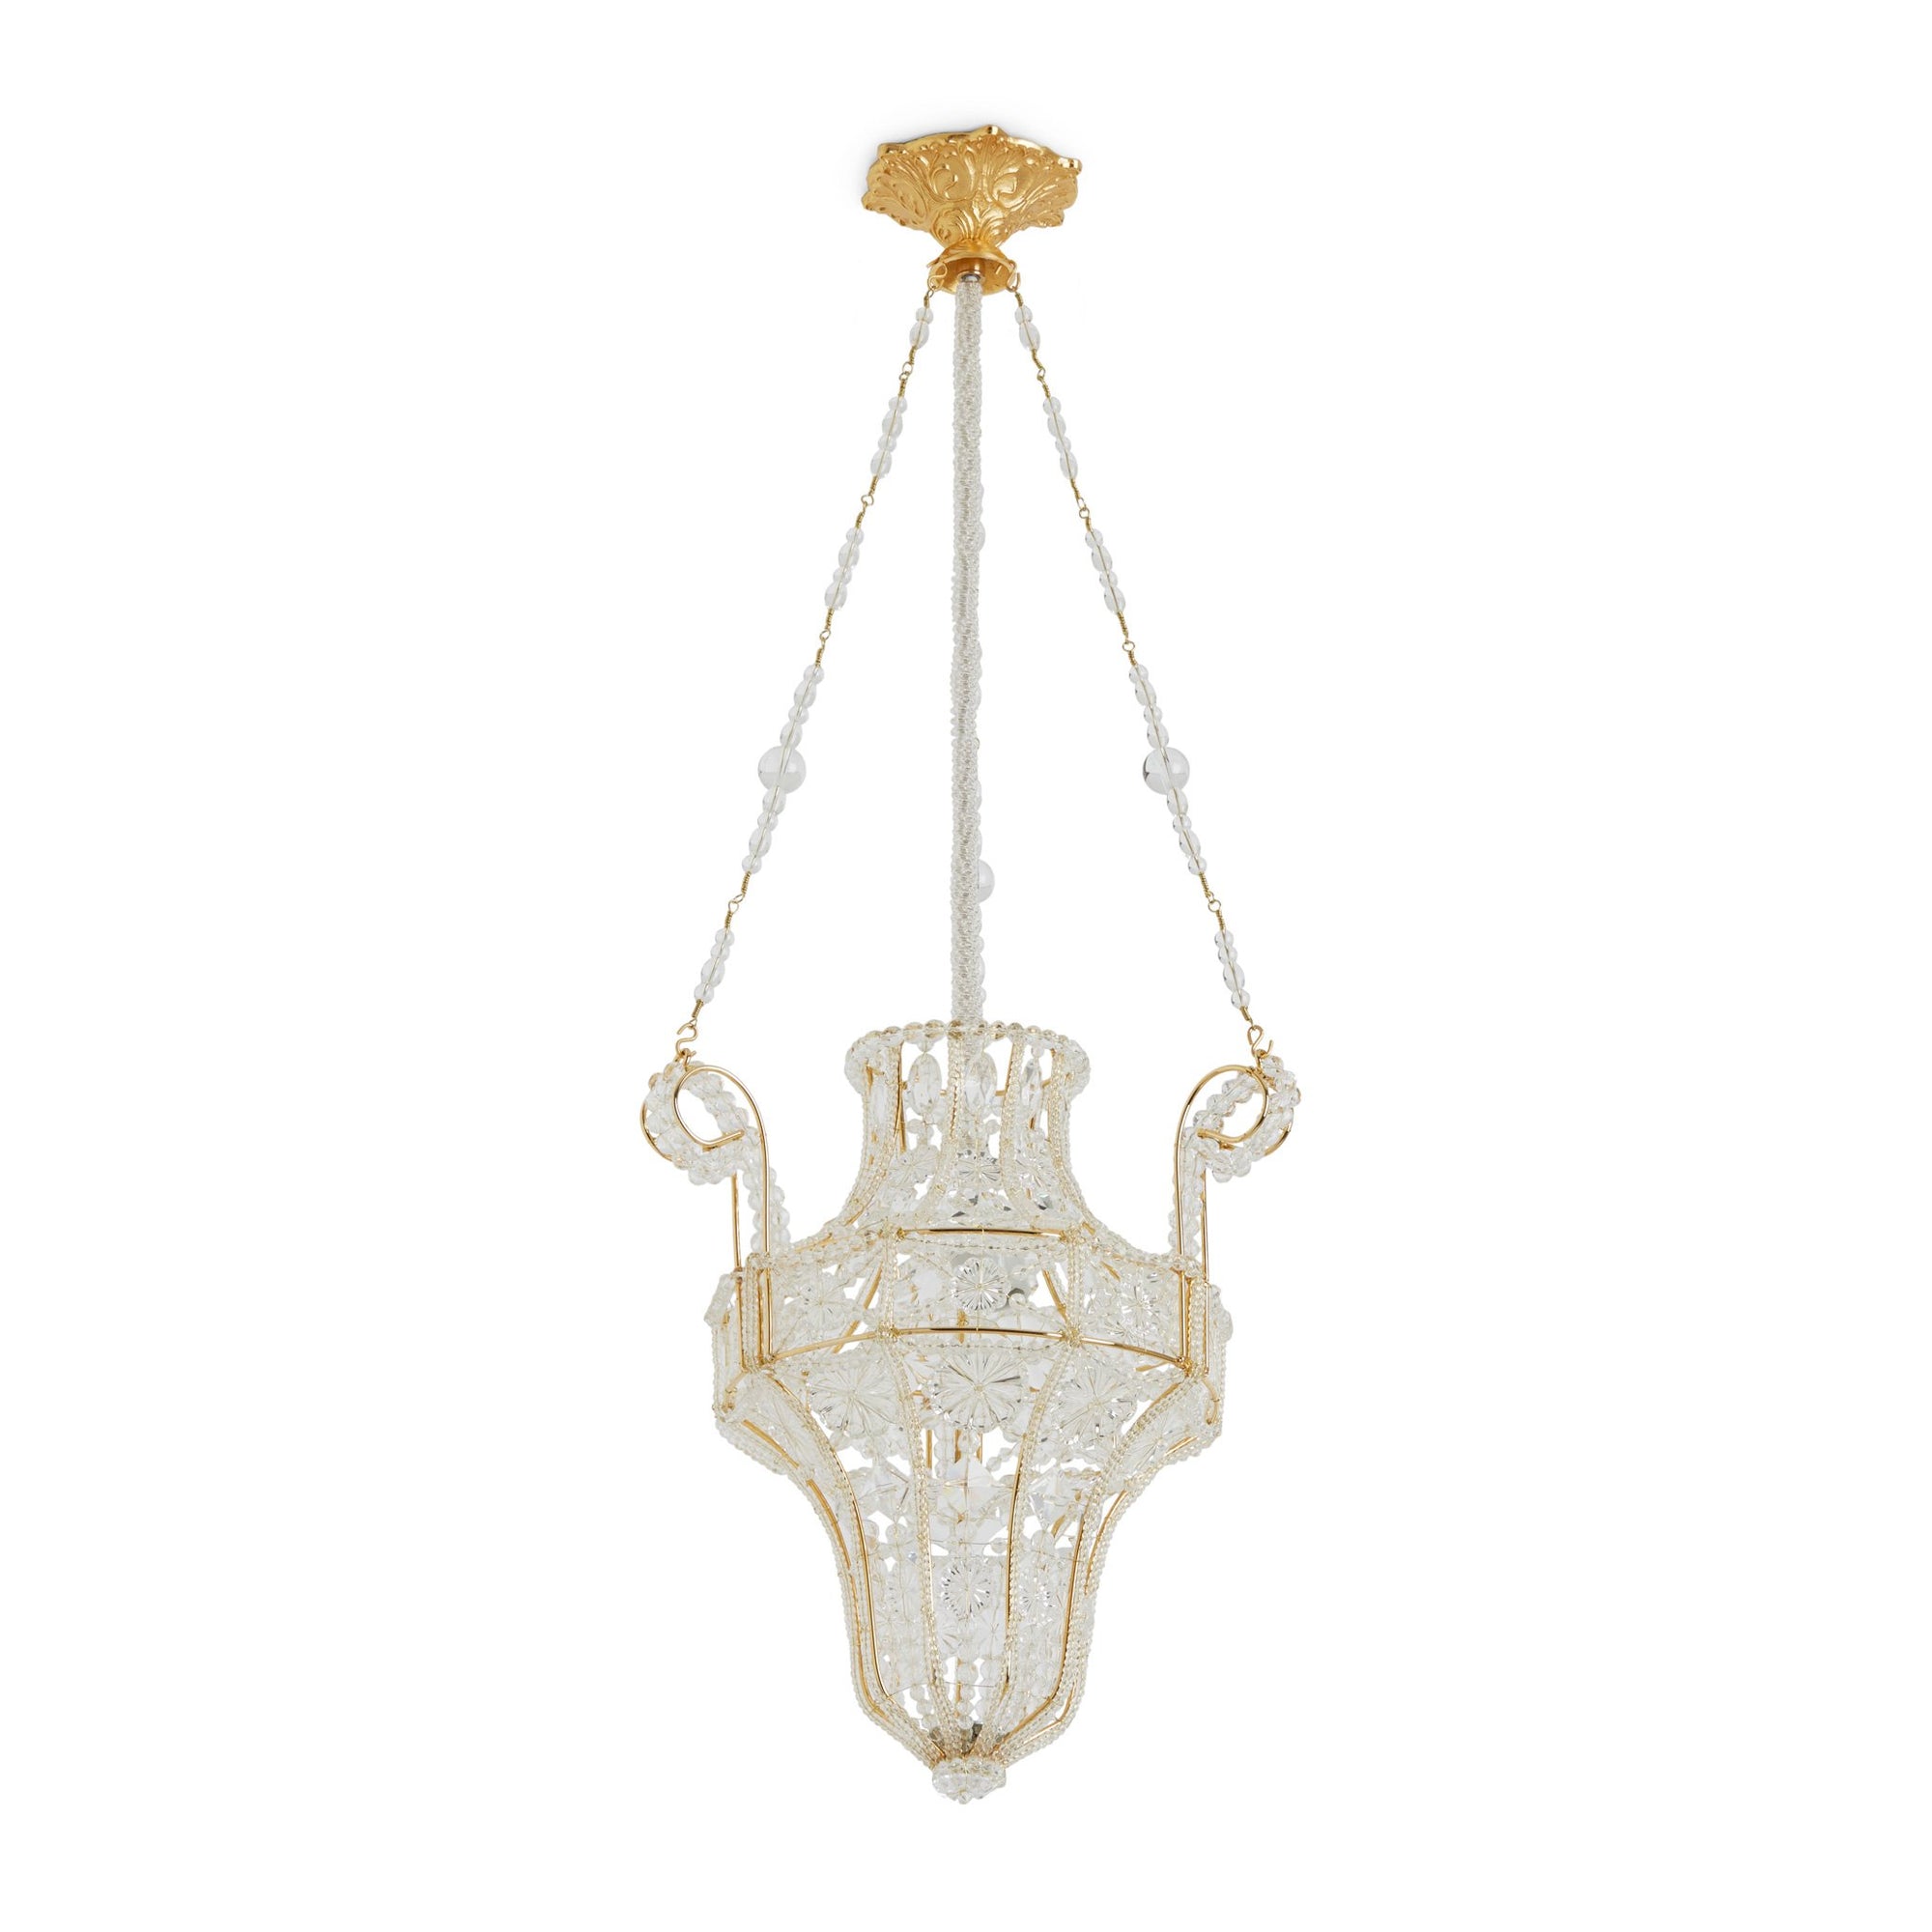 7138-GP Sherle Wagner International Crystal Pendant Chandelier with Renaissance Canopy in Gold plate metal finish